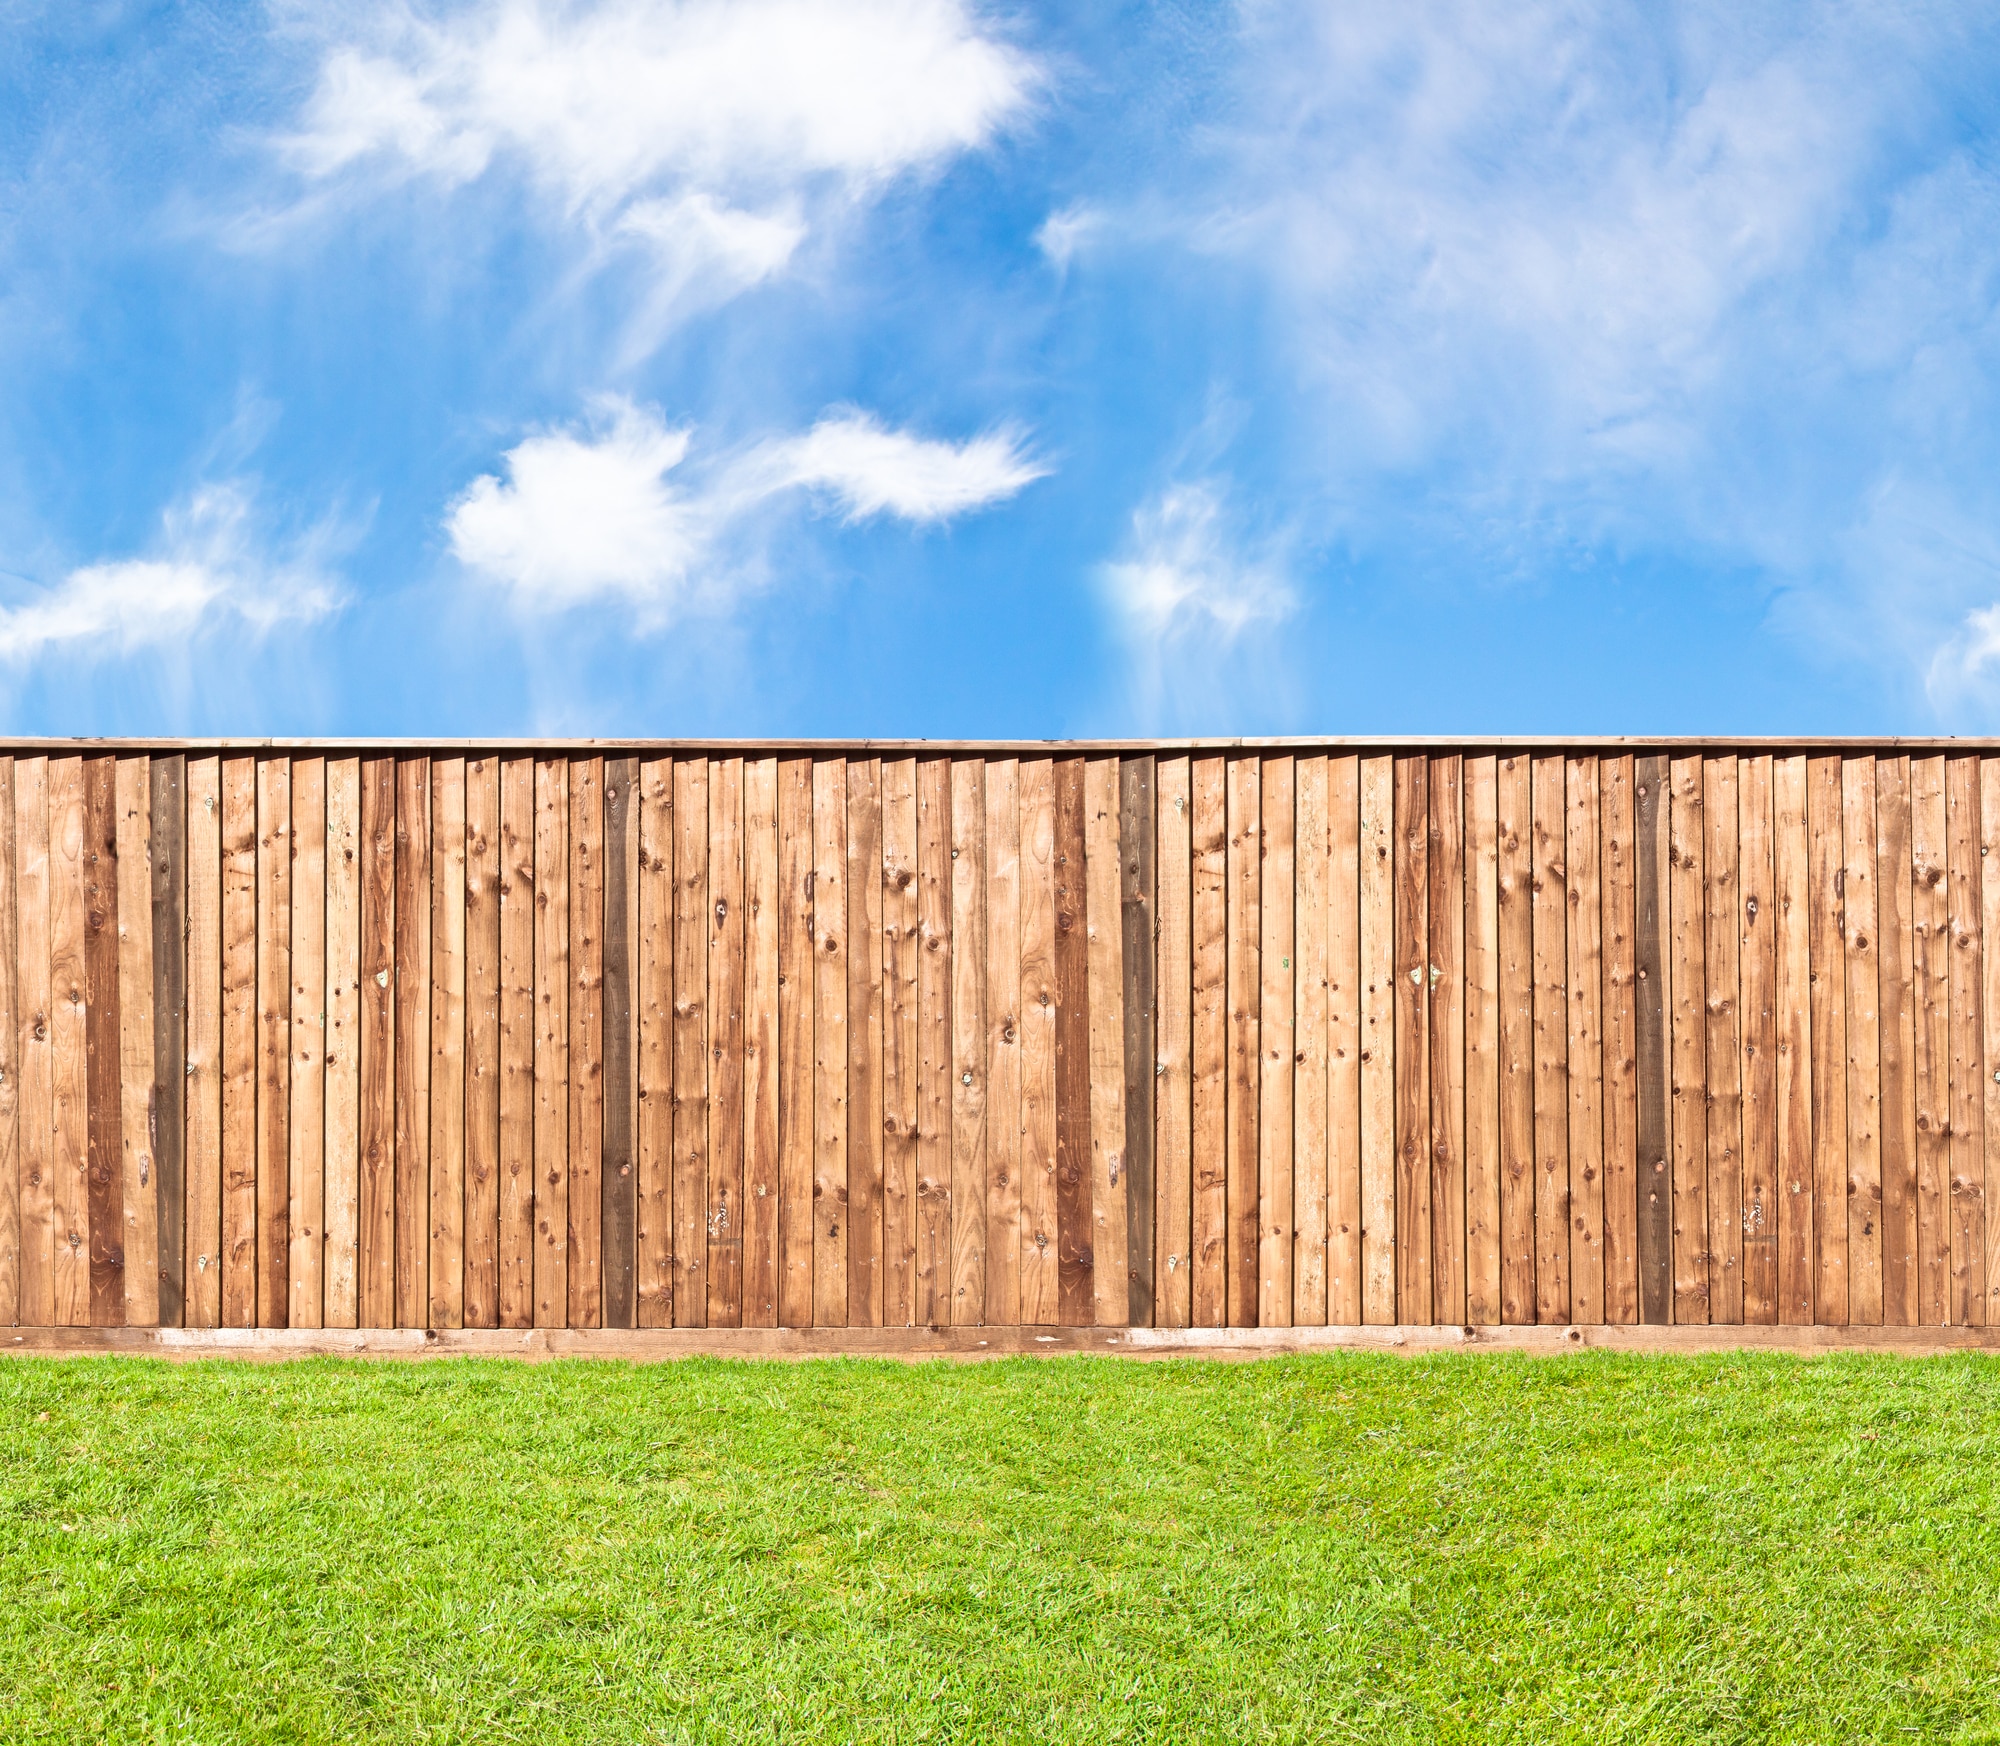 Fencing rules & regulations in Victoria